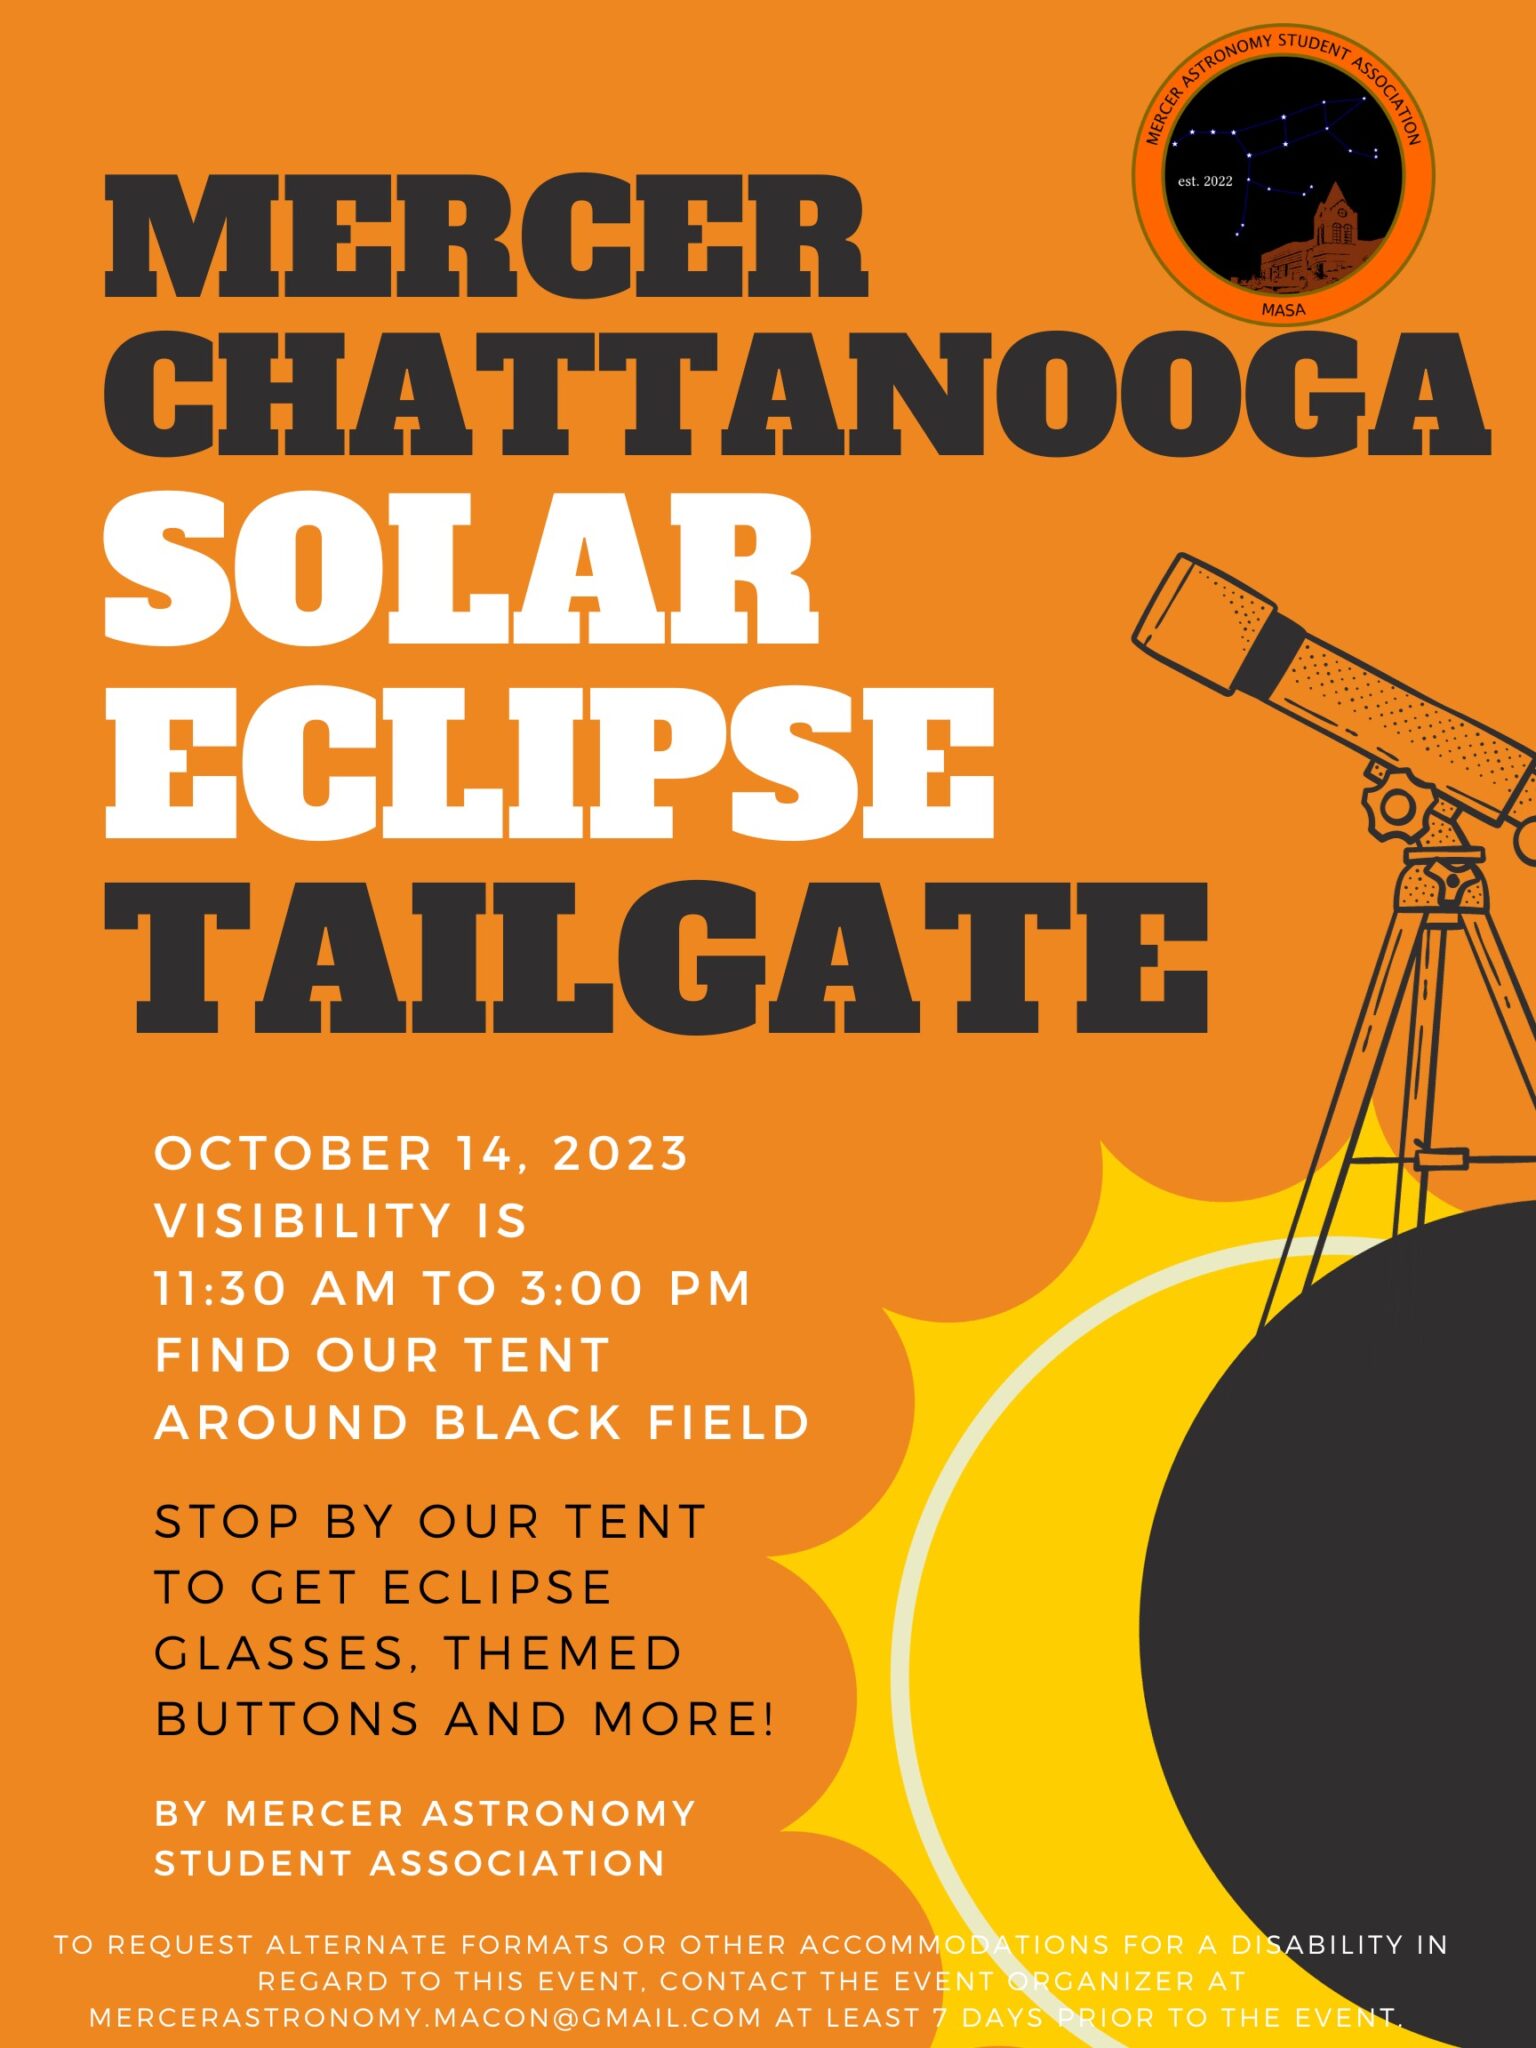 Flyer text: Mercer Chattanooga Solar Eclipse Tailgate, October 14, 2023, Visibility is 11:30 a.m. to 3:00 p.m. Find our tent around black field. Stop by our tent to get eclipse glasses, themed buttons and more! By Mercer Astronomy student association. to request alternate formats or other accommodations for a disability in regard to this event, contact the event organizer at mercerastronomy.macon@gmail.com at least 7 days prior to the event